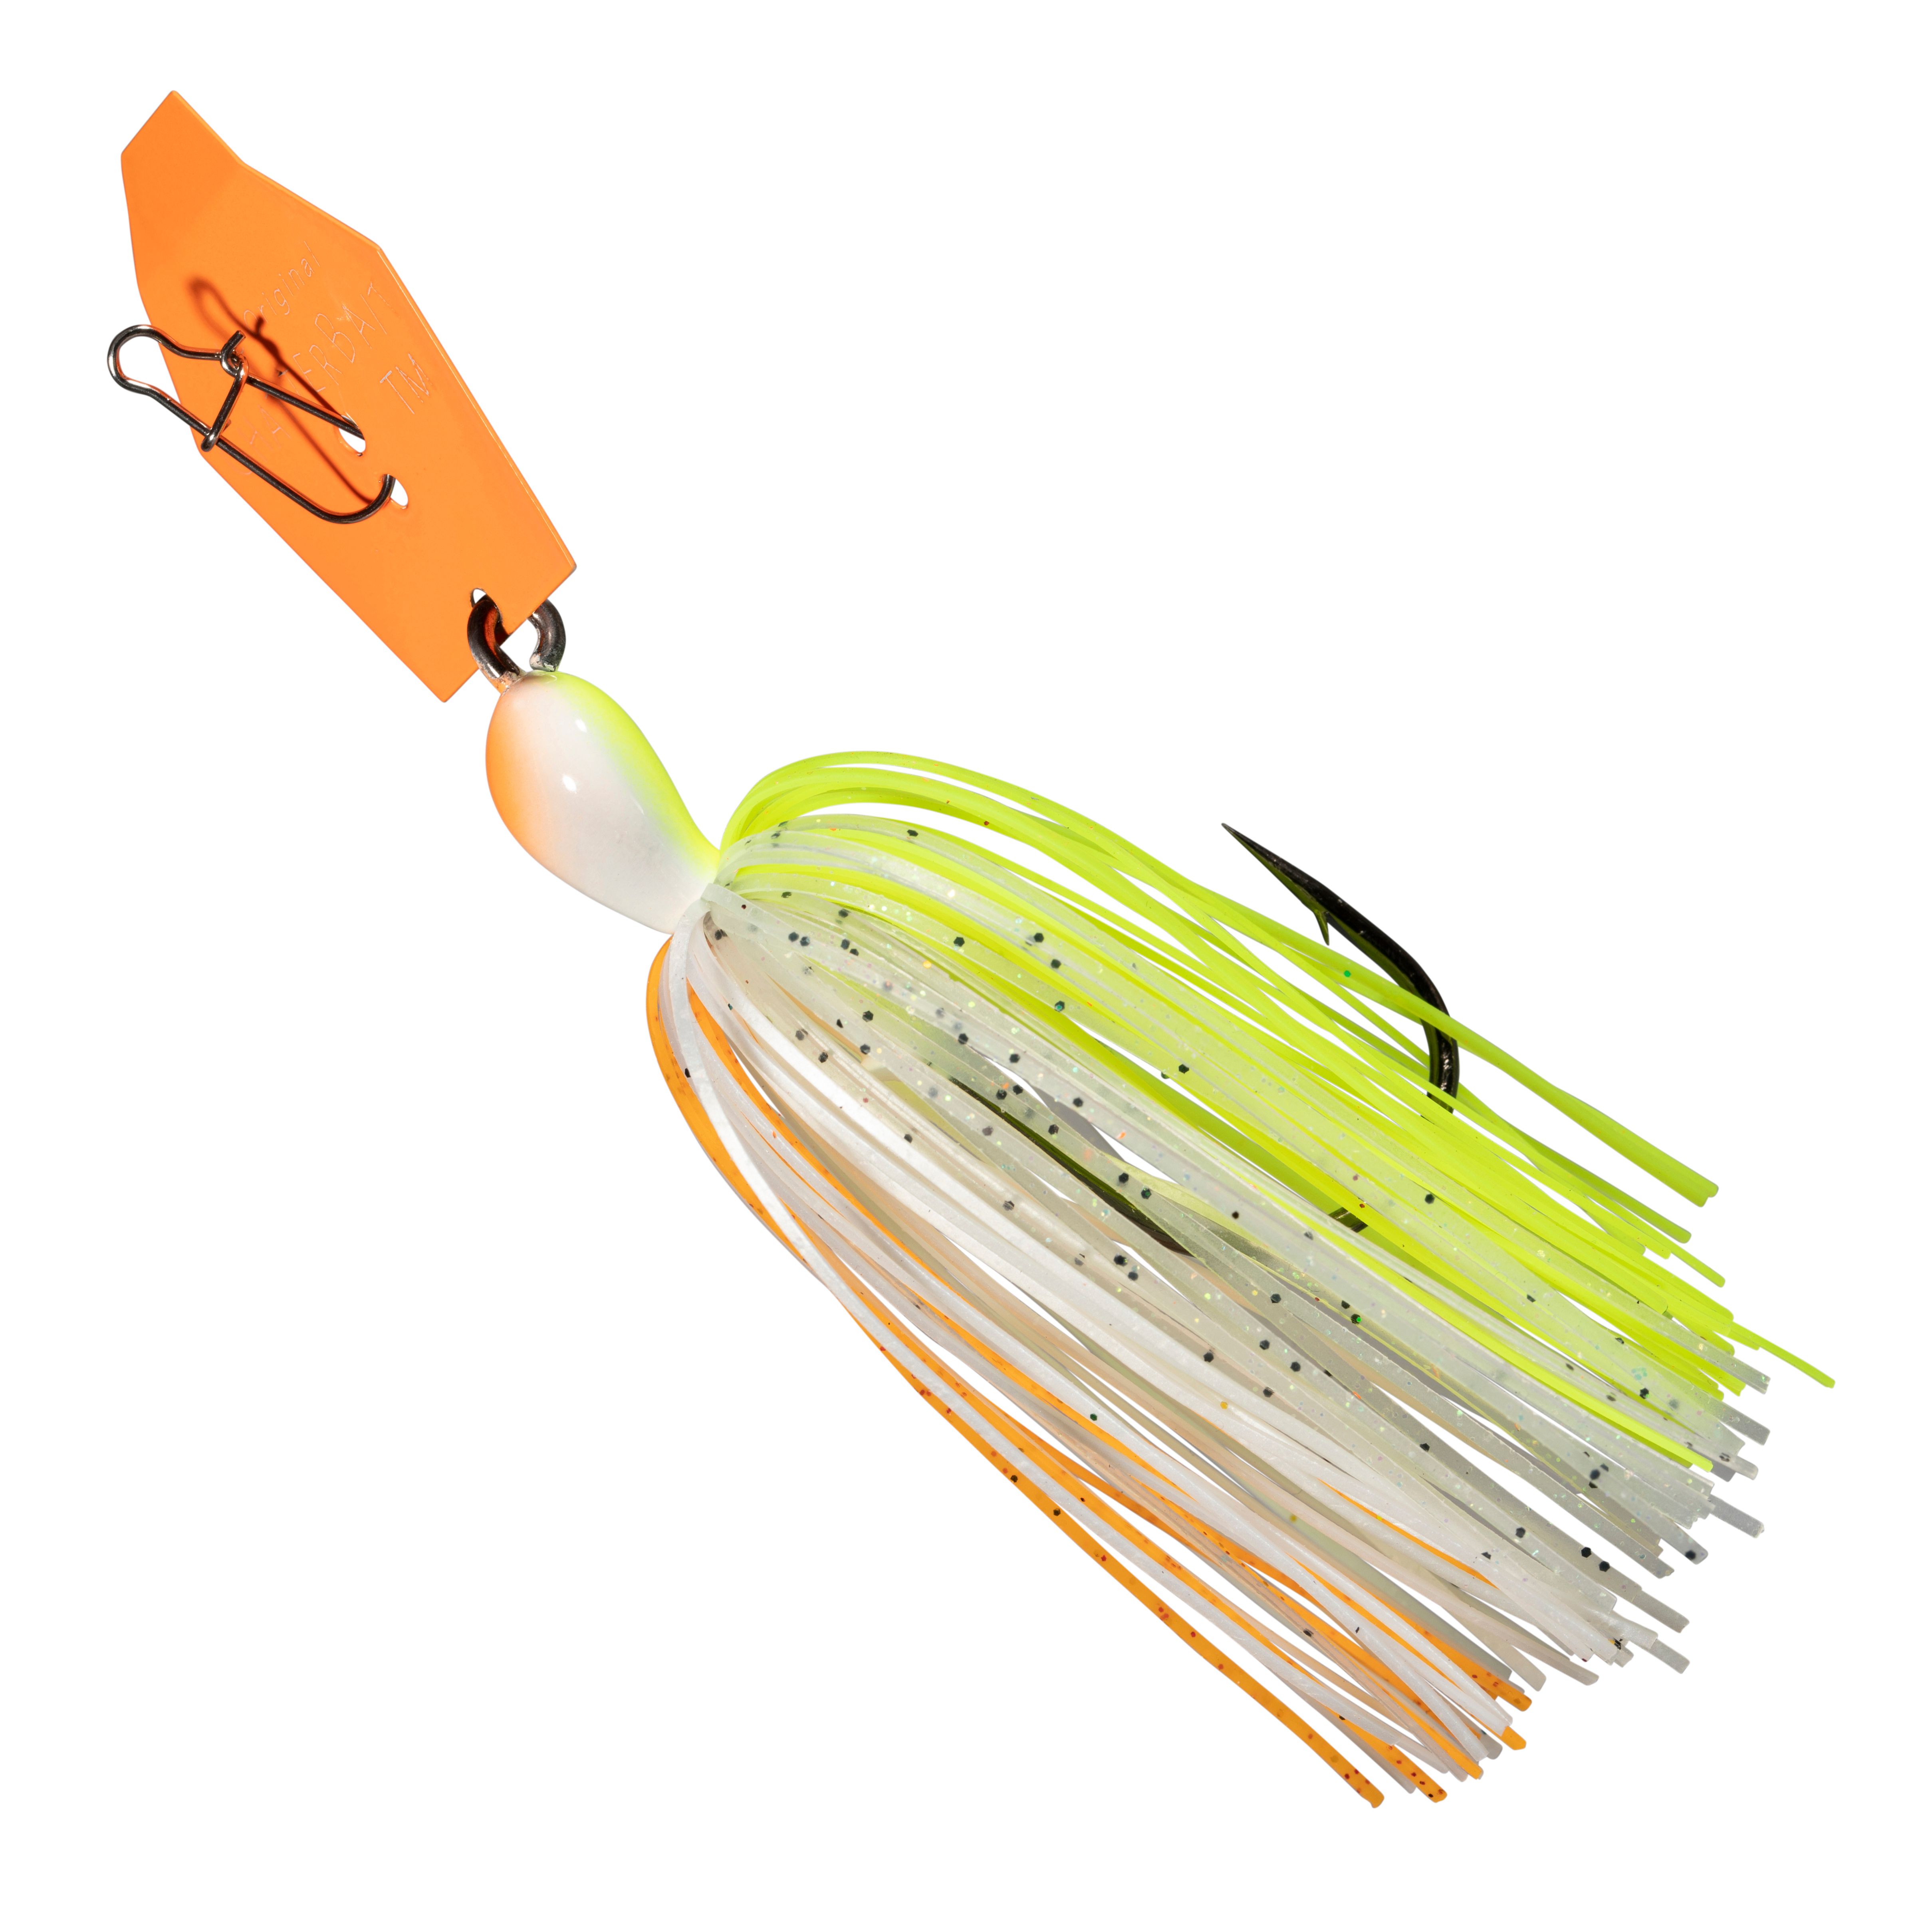 Z-Man Big Blade ChatterBait 1/2, 5/8, or 3/4 oz Oversized Bladed